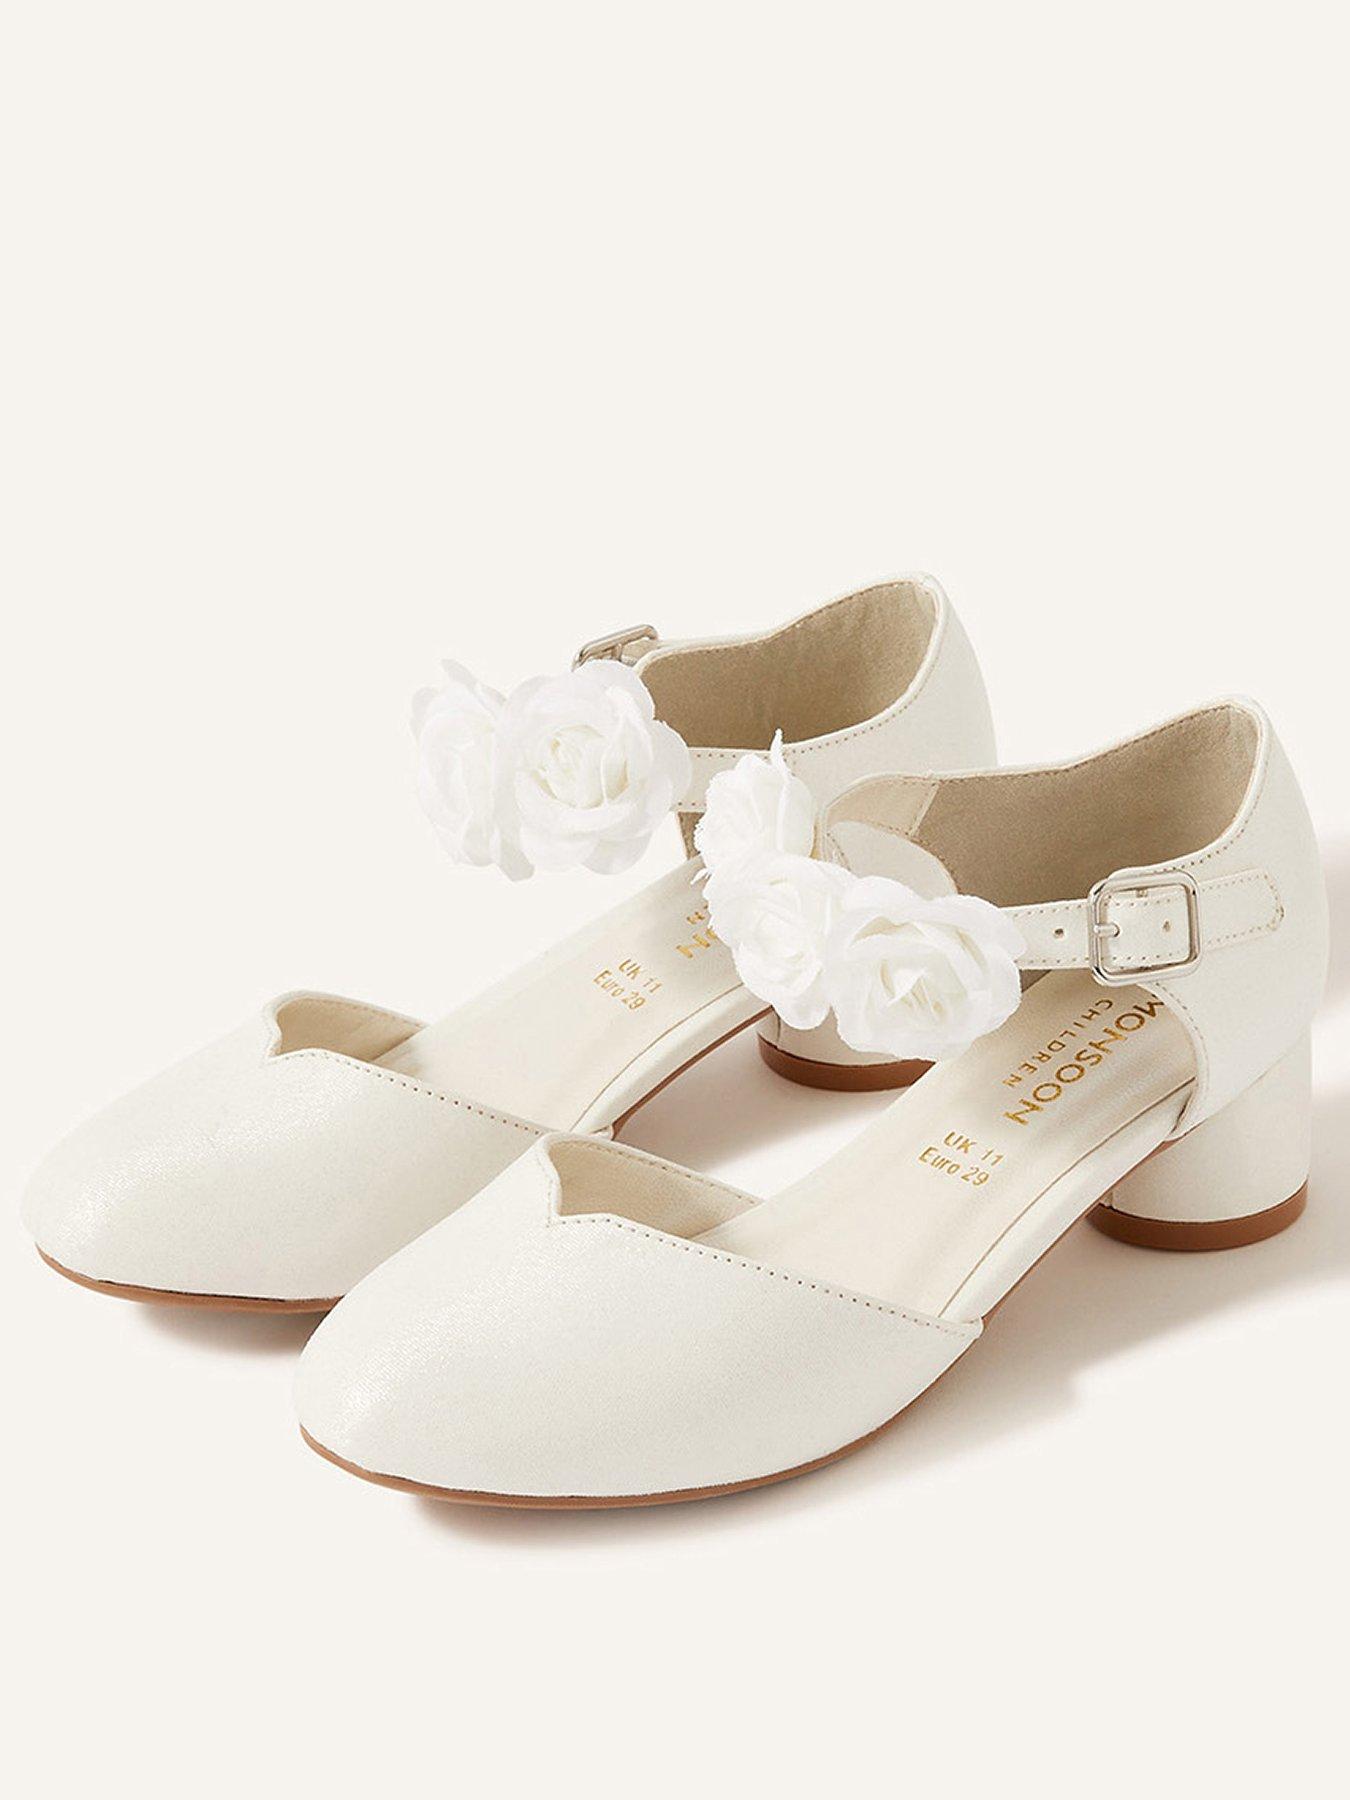 13.5   4 sizes   3    5 Details about   New Girls White Dress Party shoes 